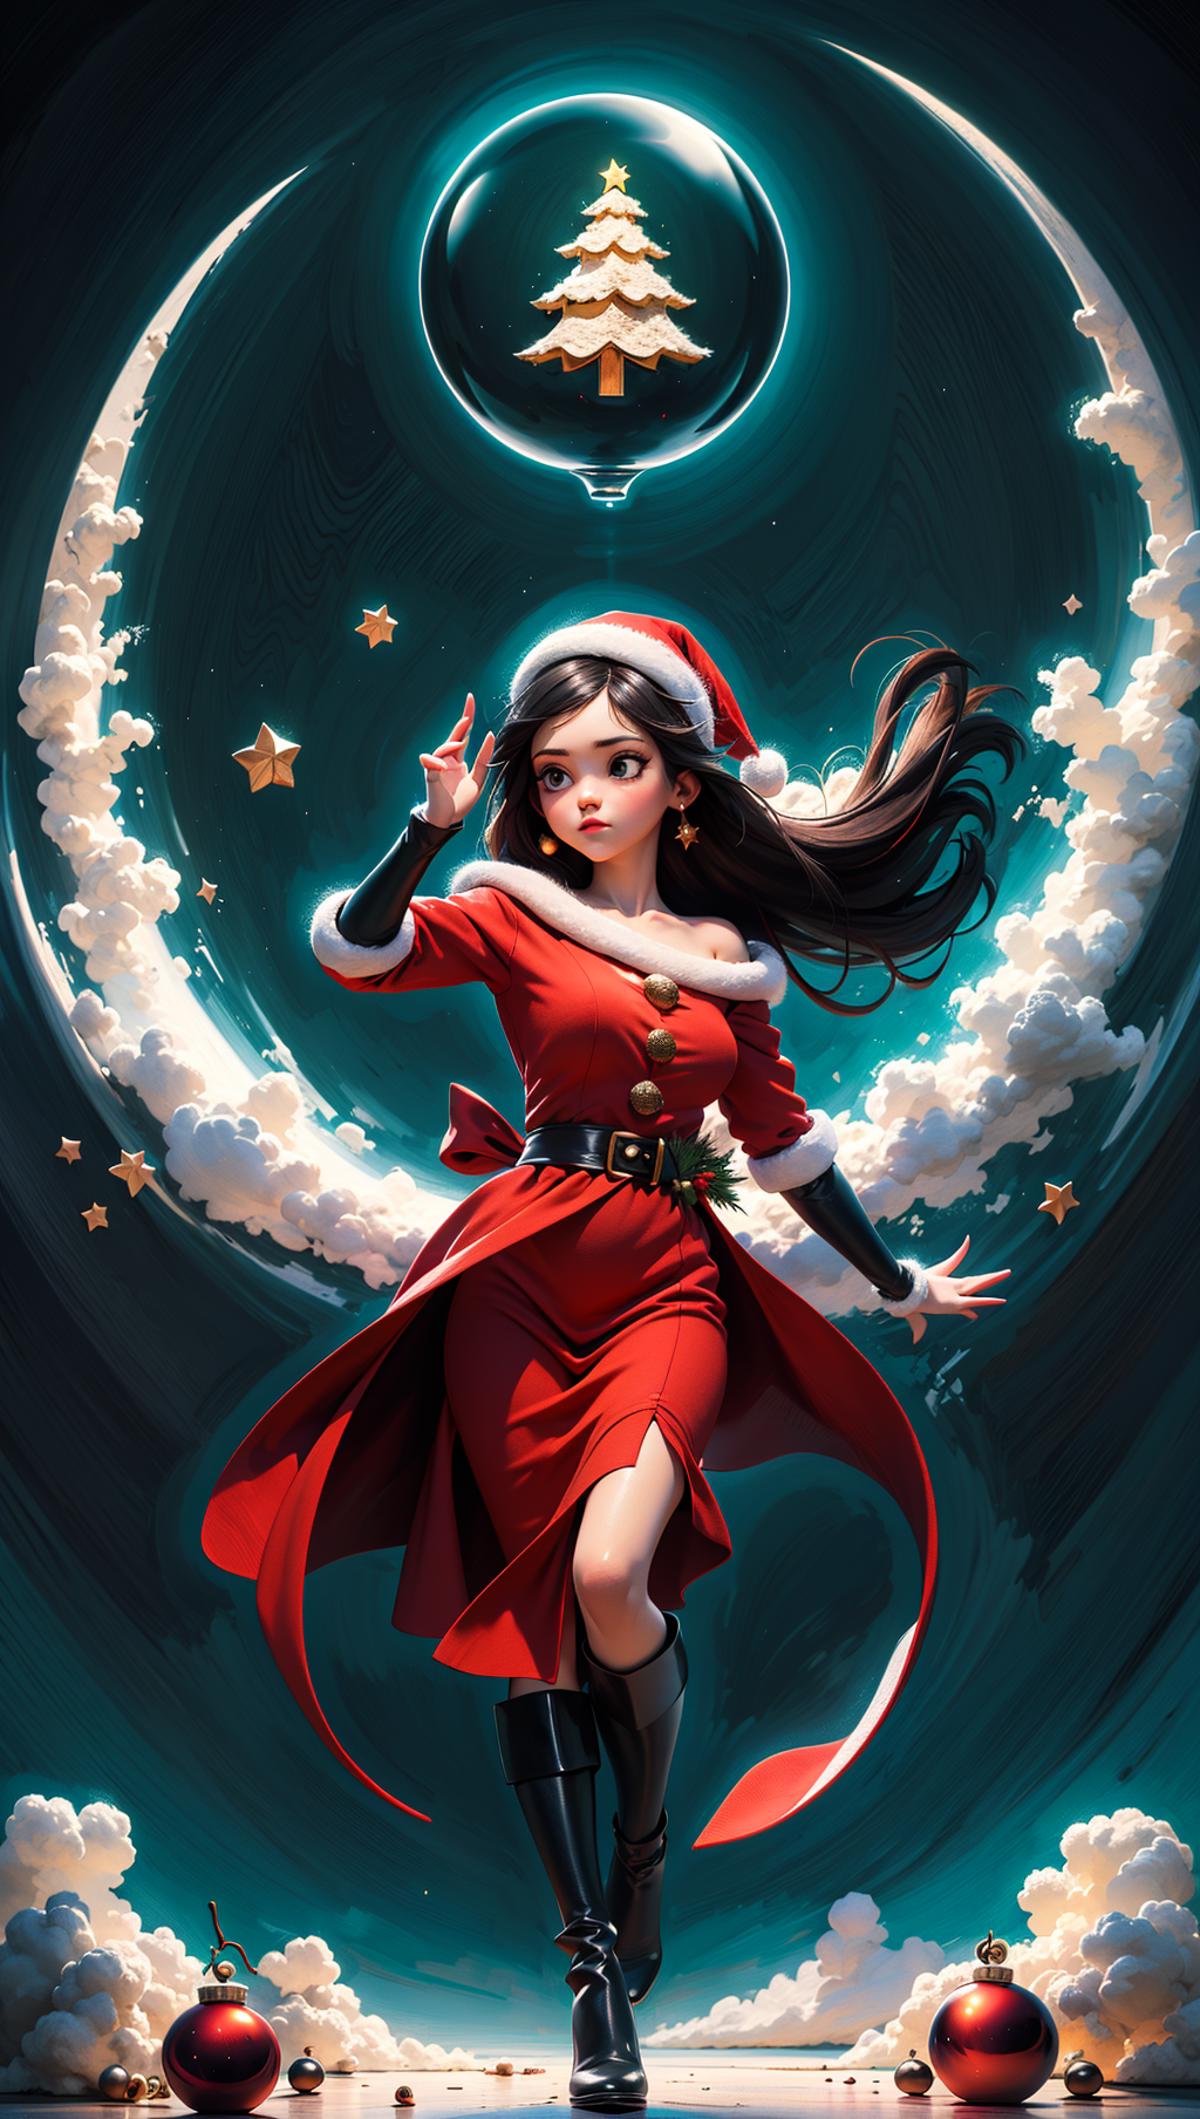 A digital painting of a woman in a Santa dress.